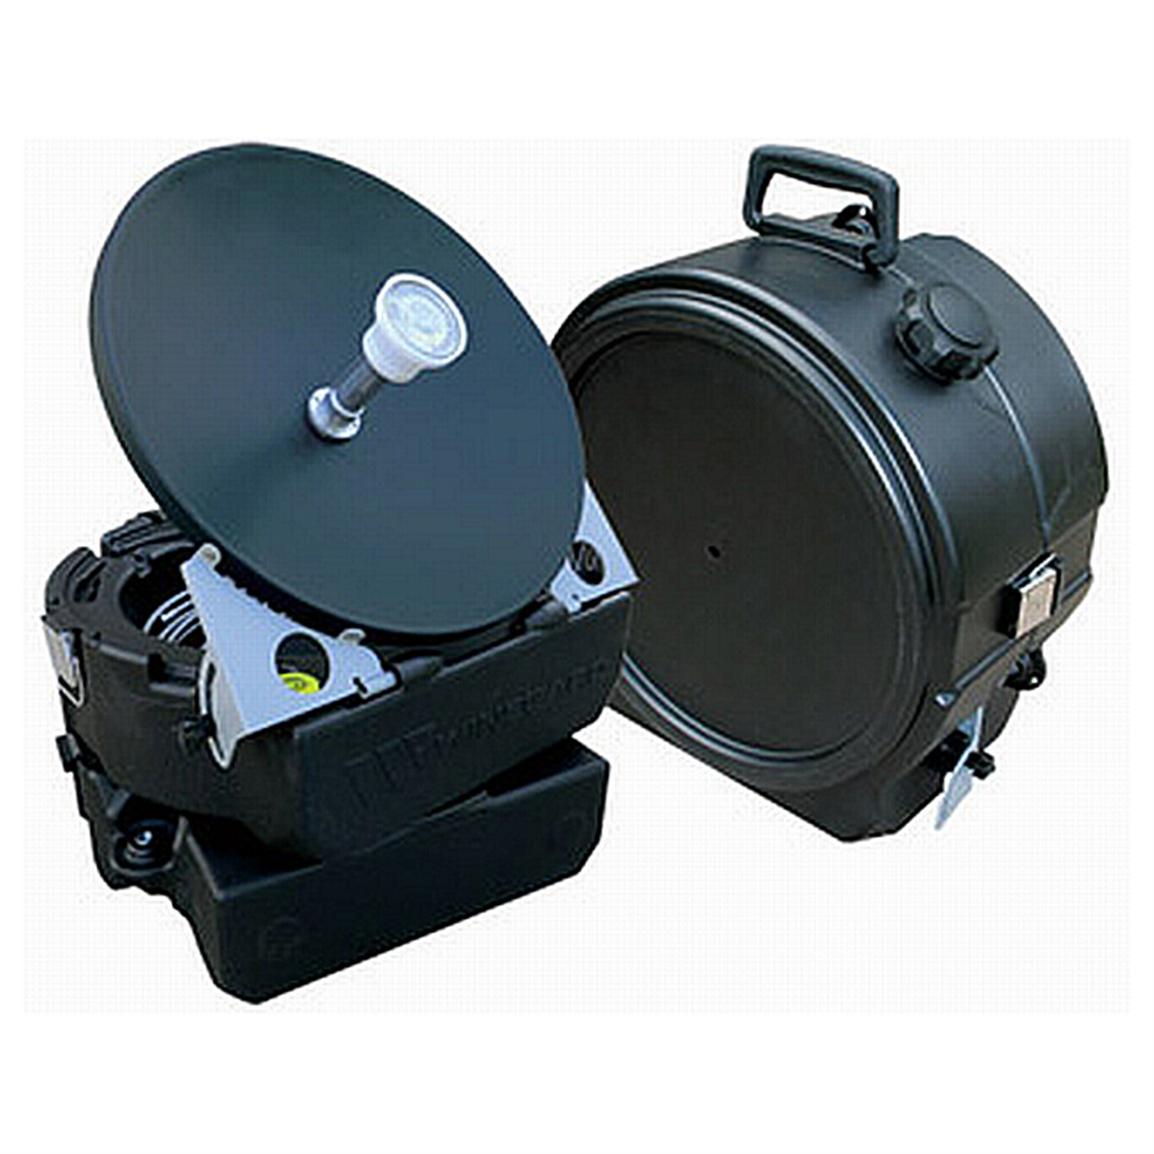 Carryout™ MP1™ Manual Portable Satellite TV Antenna - 425599, RV Appliances at Sportsman&#39;s Guide